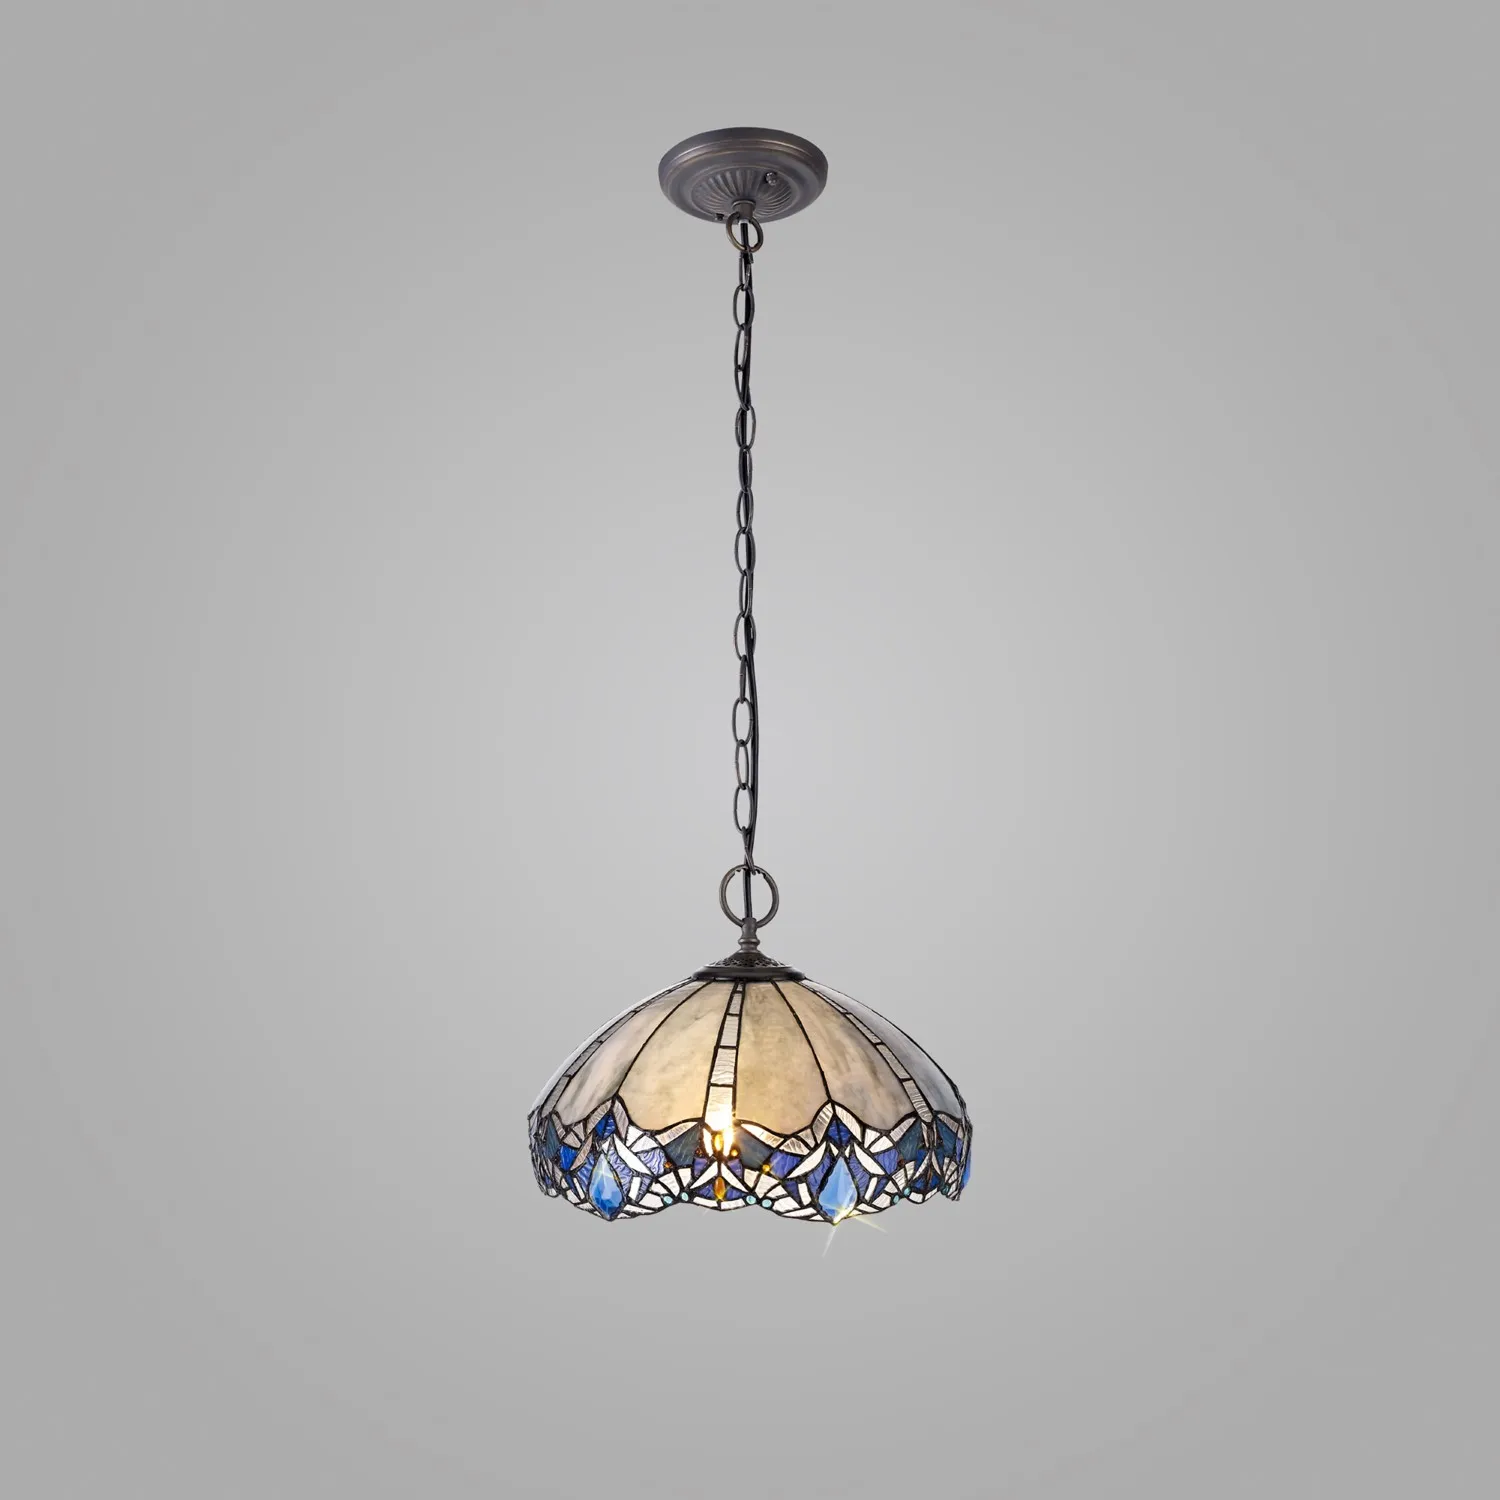 Ardingly 2 Light Downlight Pendant E27 With 40cm Tiffany Shade, Blue Clear Crystal Aged Antique Brass